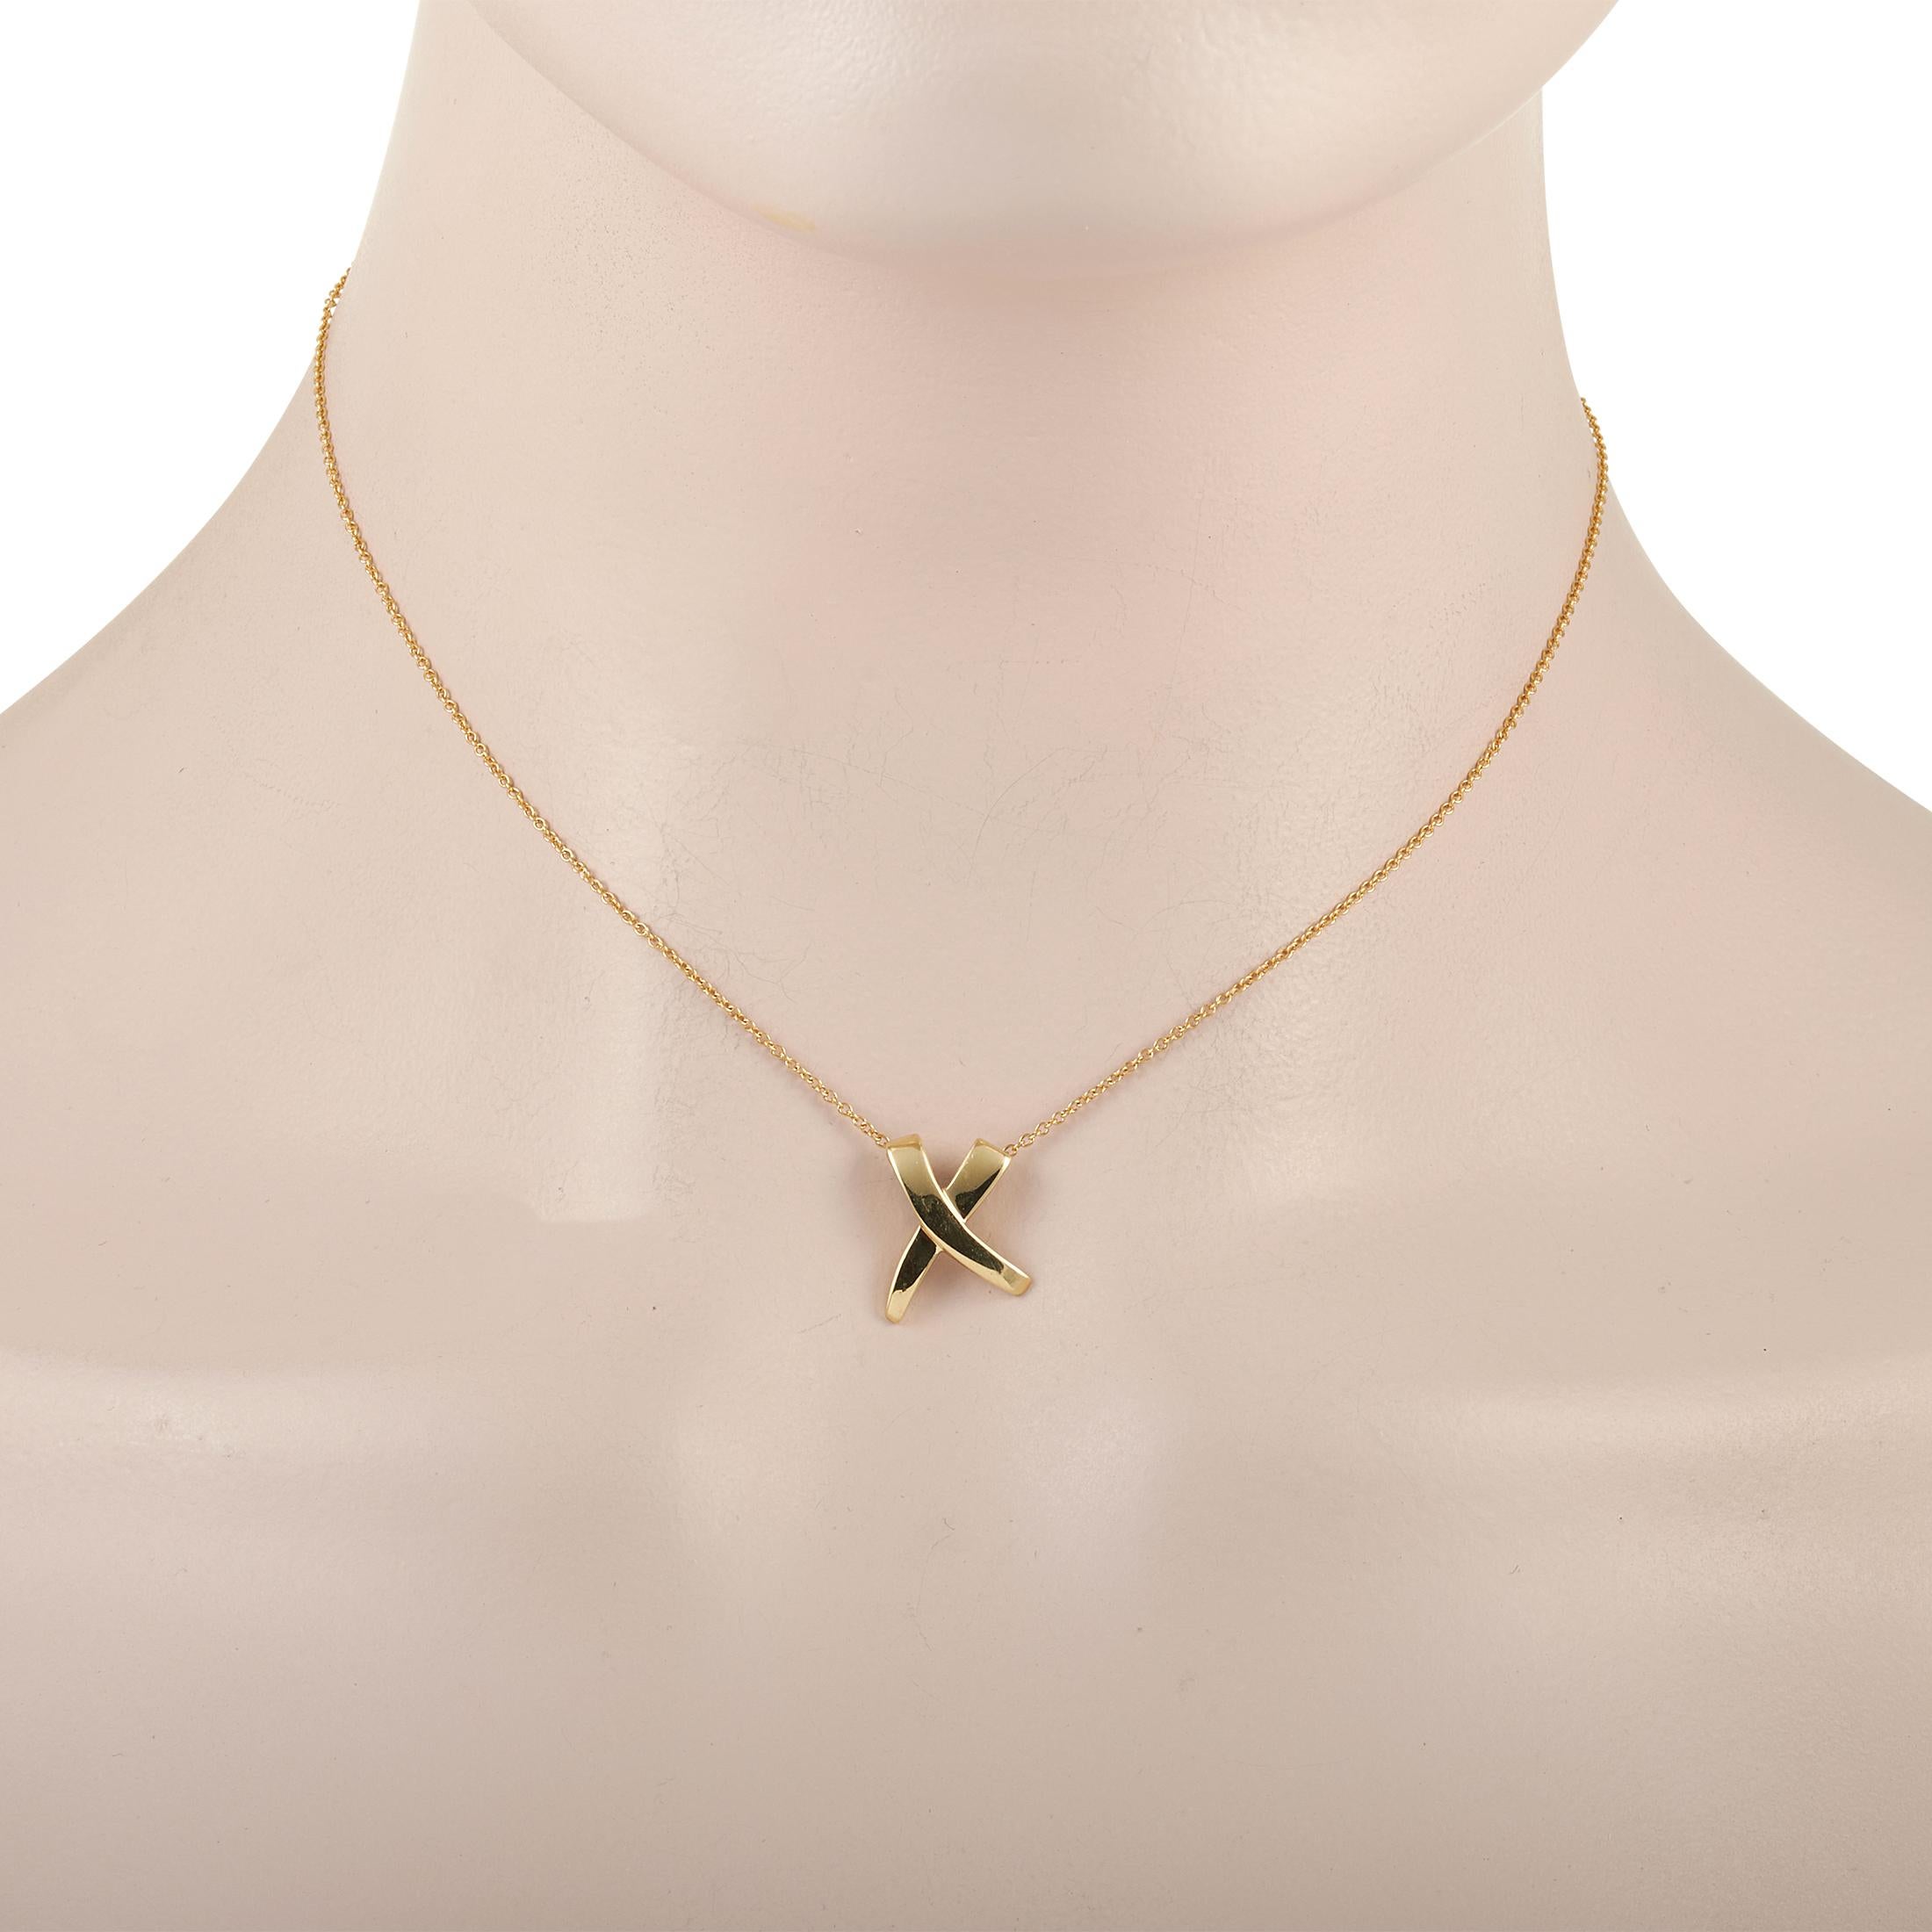 For the young and the young-at-heart, here is a Tiffany & Co. Paloma Picasso X Graffiti 18K Yellow Gold Pendant that's elegant and artsy. The pendant is an 